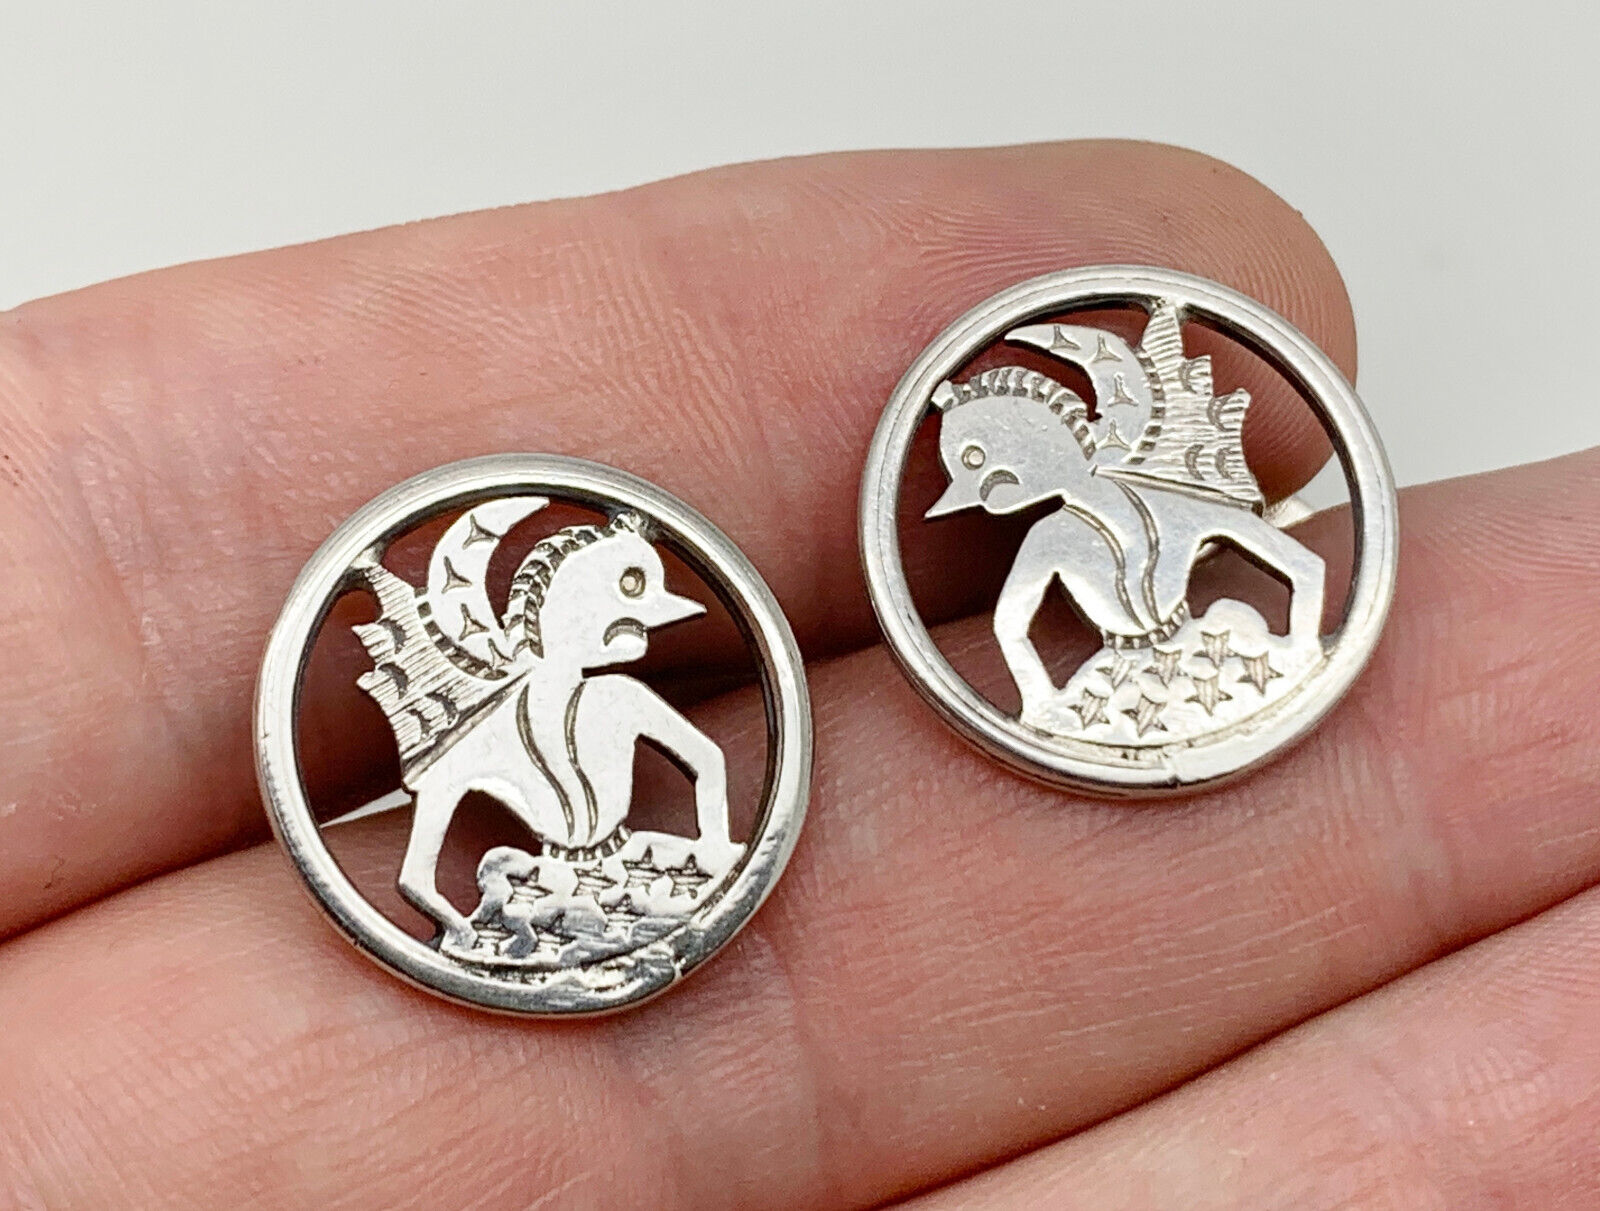 Antique/Vintage Islamic Sterling Silver Unusual Mythical Creature Cufflinks